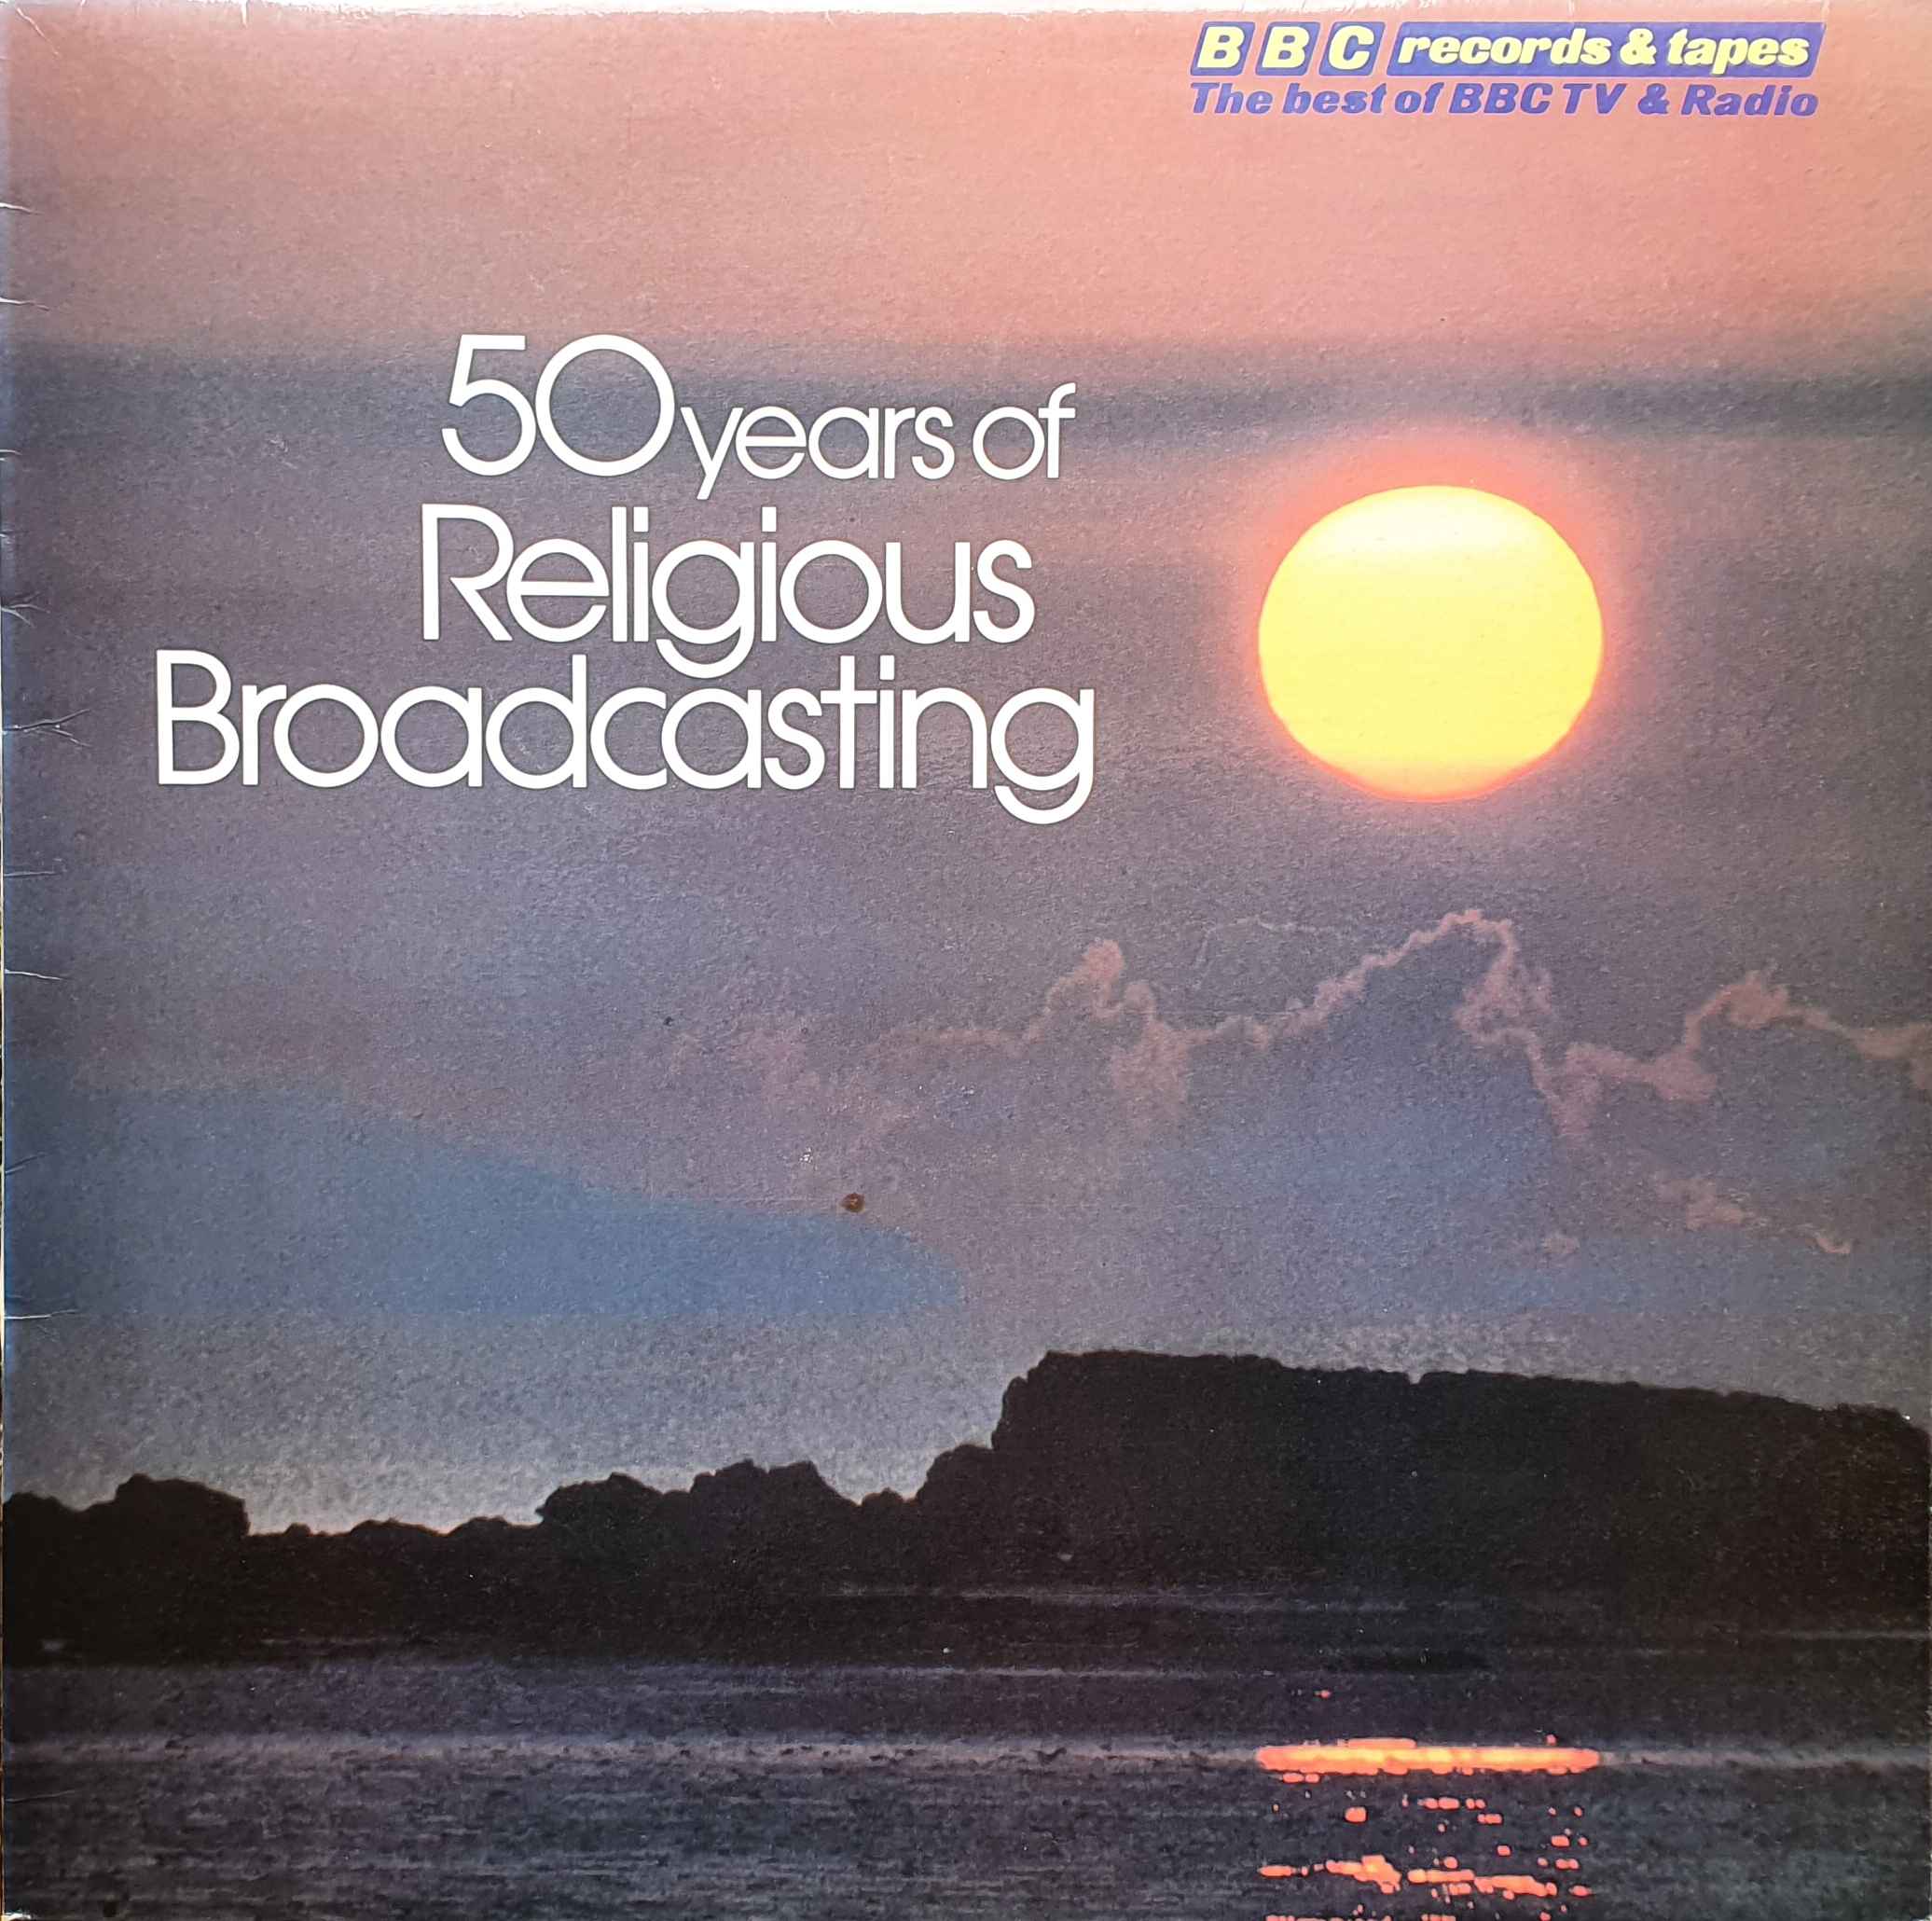 Picture of REC 184 50 years of religious broadcasting by artist Various from the BBC albums - Records and Tapes library